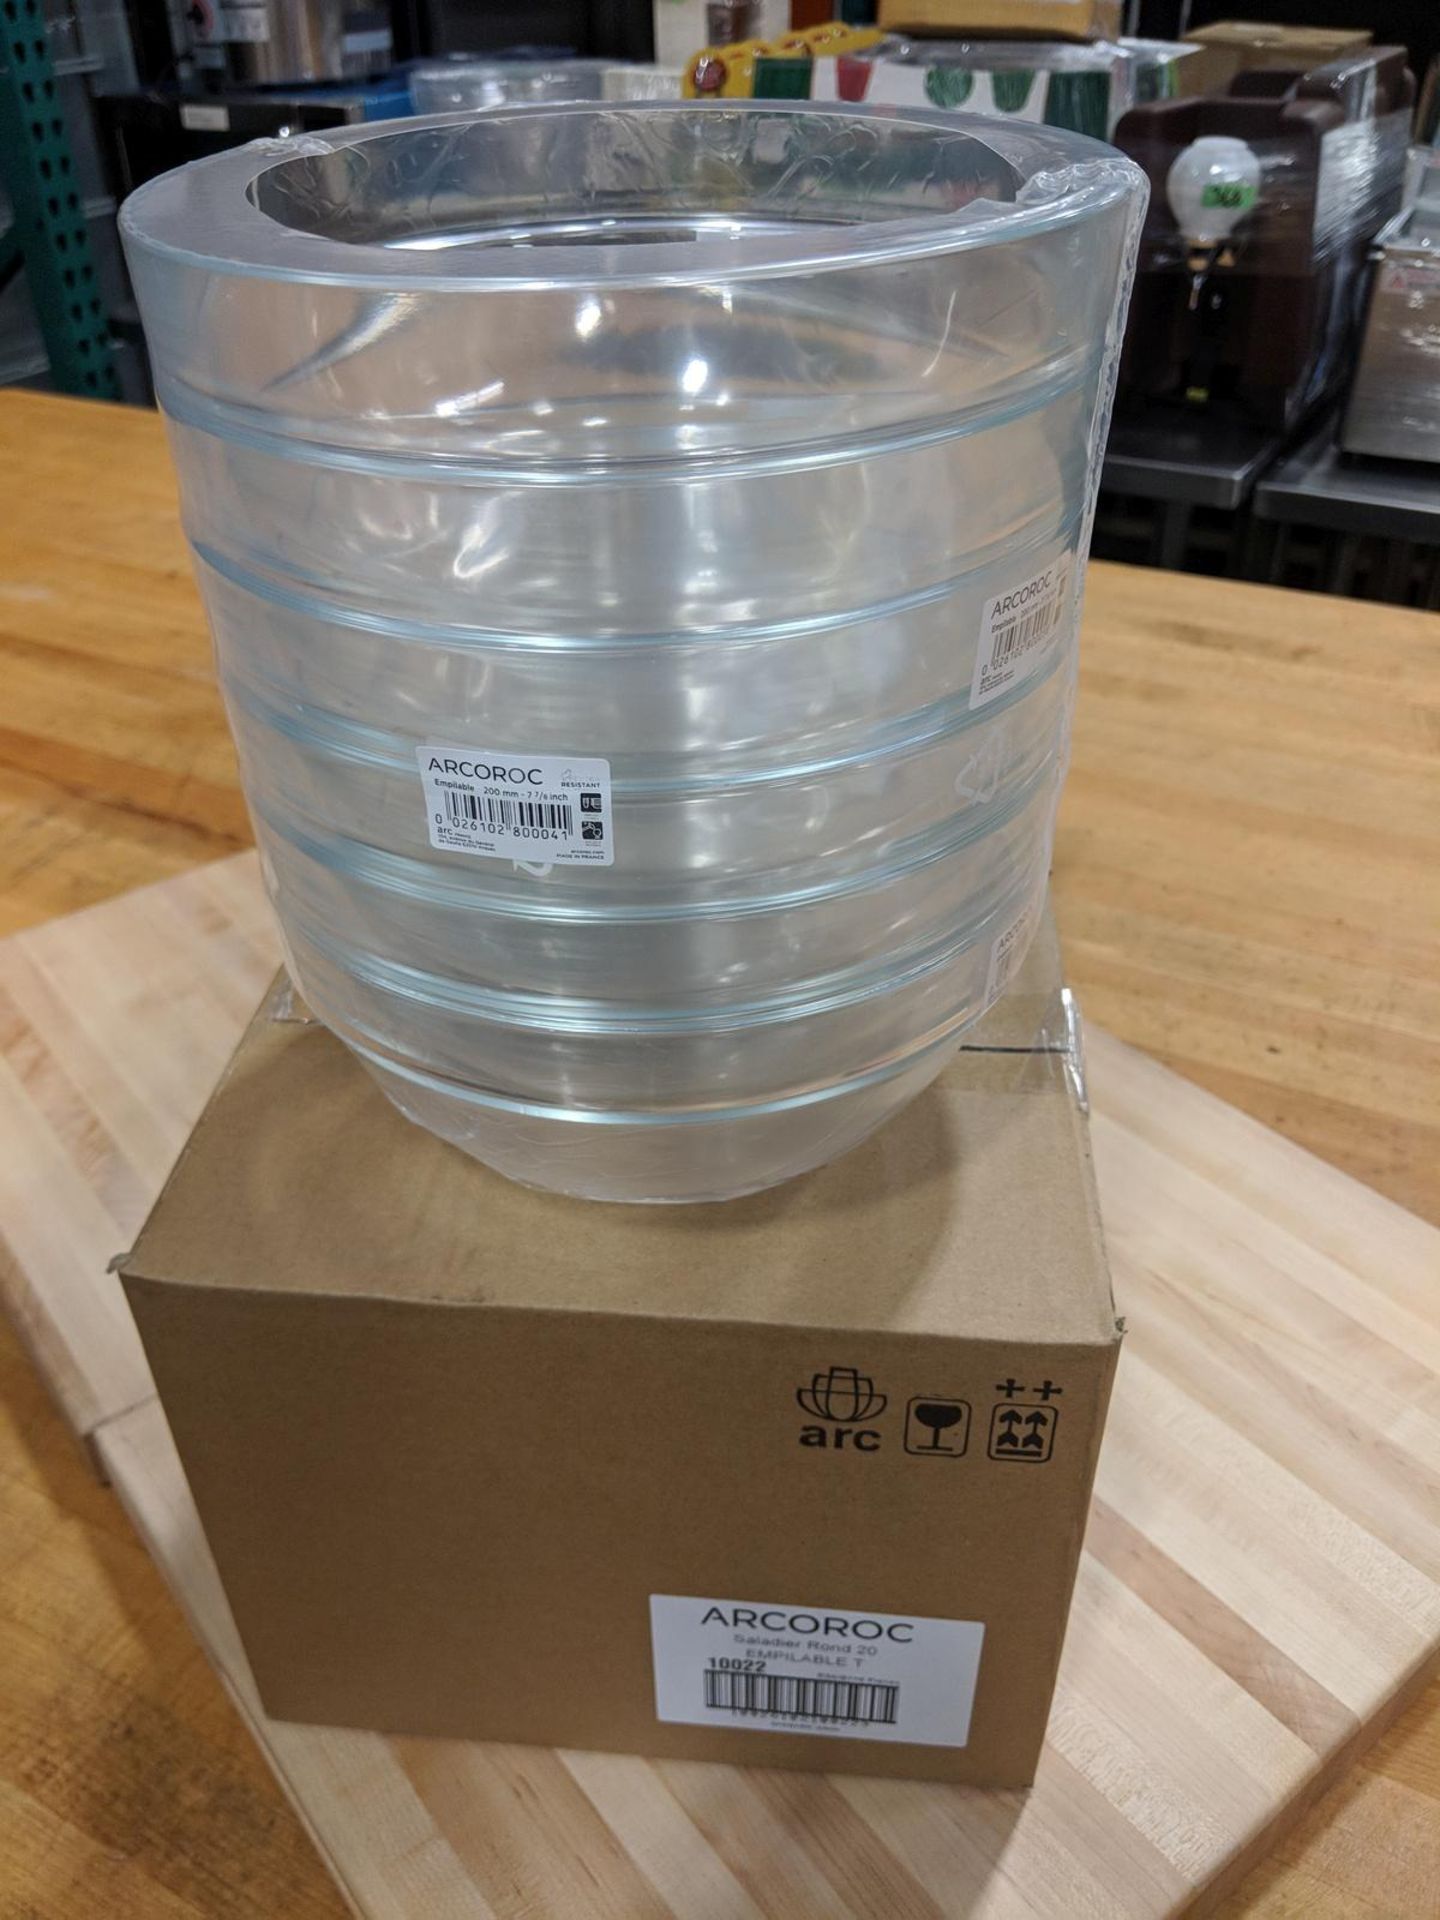 8" Glass Stacking Salad Bowls, 64oz/1.9L - Lot of 12 (2 Cases), Arcoroc 10022